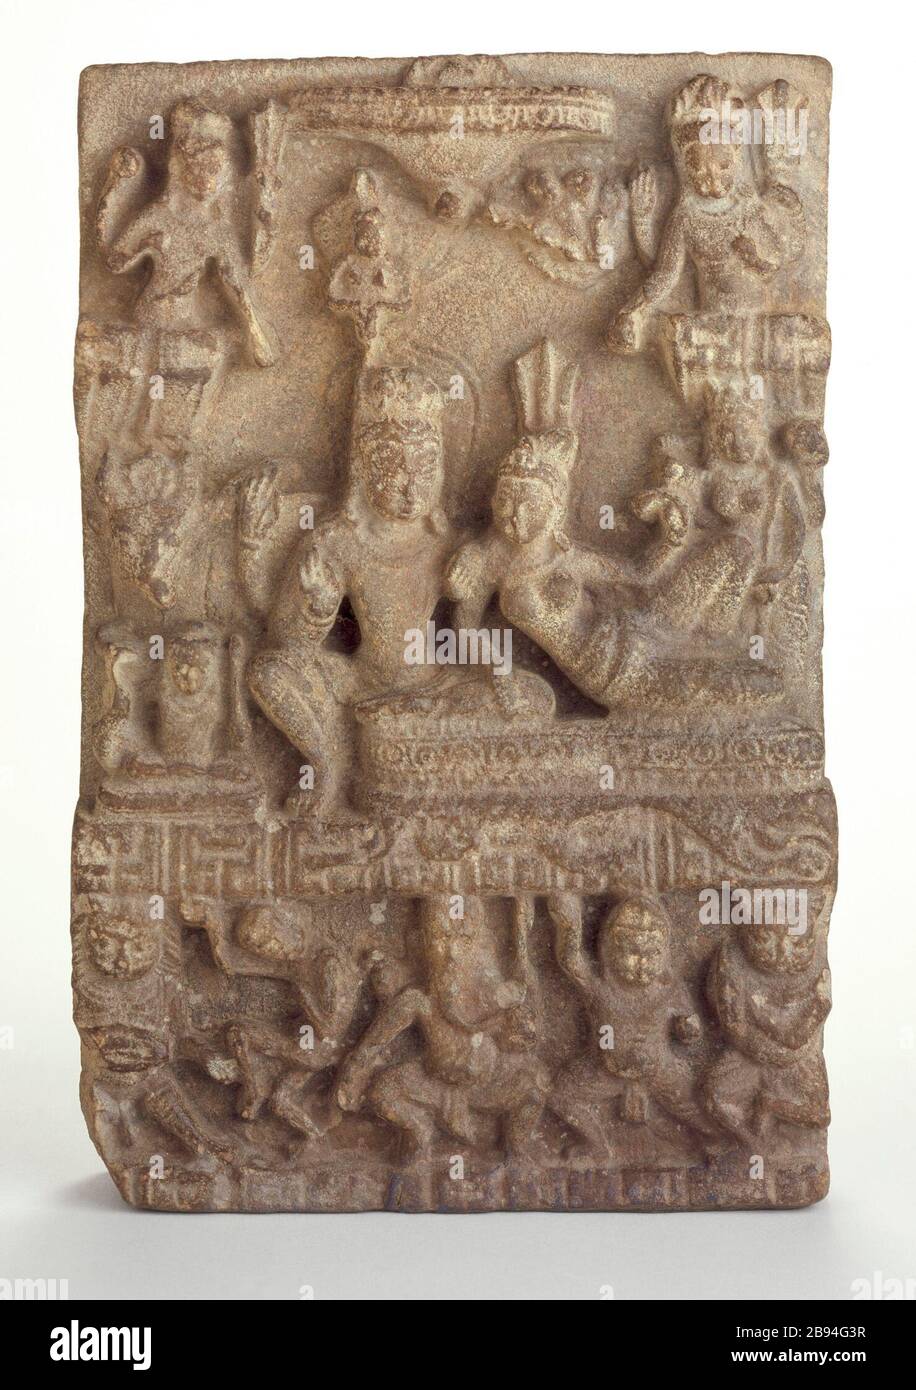 'Shiva's Family; English:  Nepal, 9th century Sculpture Stone Gift of The Ahmanson Foundation (M.81.23) South and Southeast Asian Art; 9th century date QS:P571,+850-00-00T00:00:00Z/7; ' Stock Photo